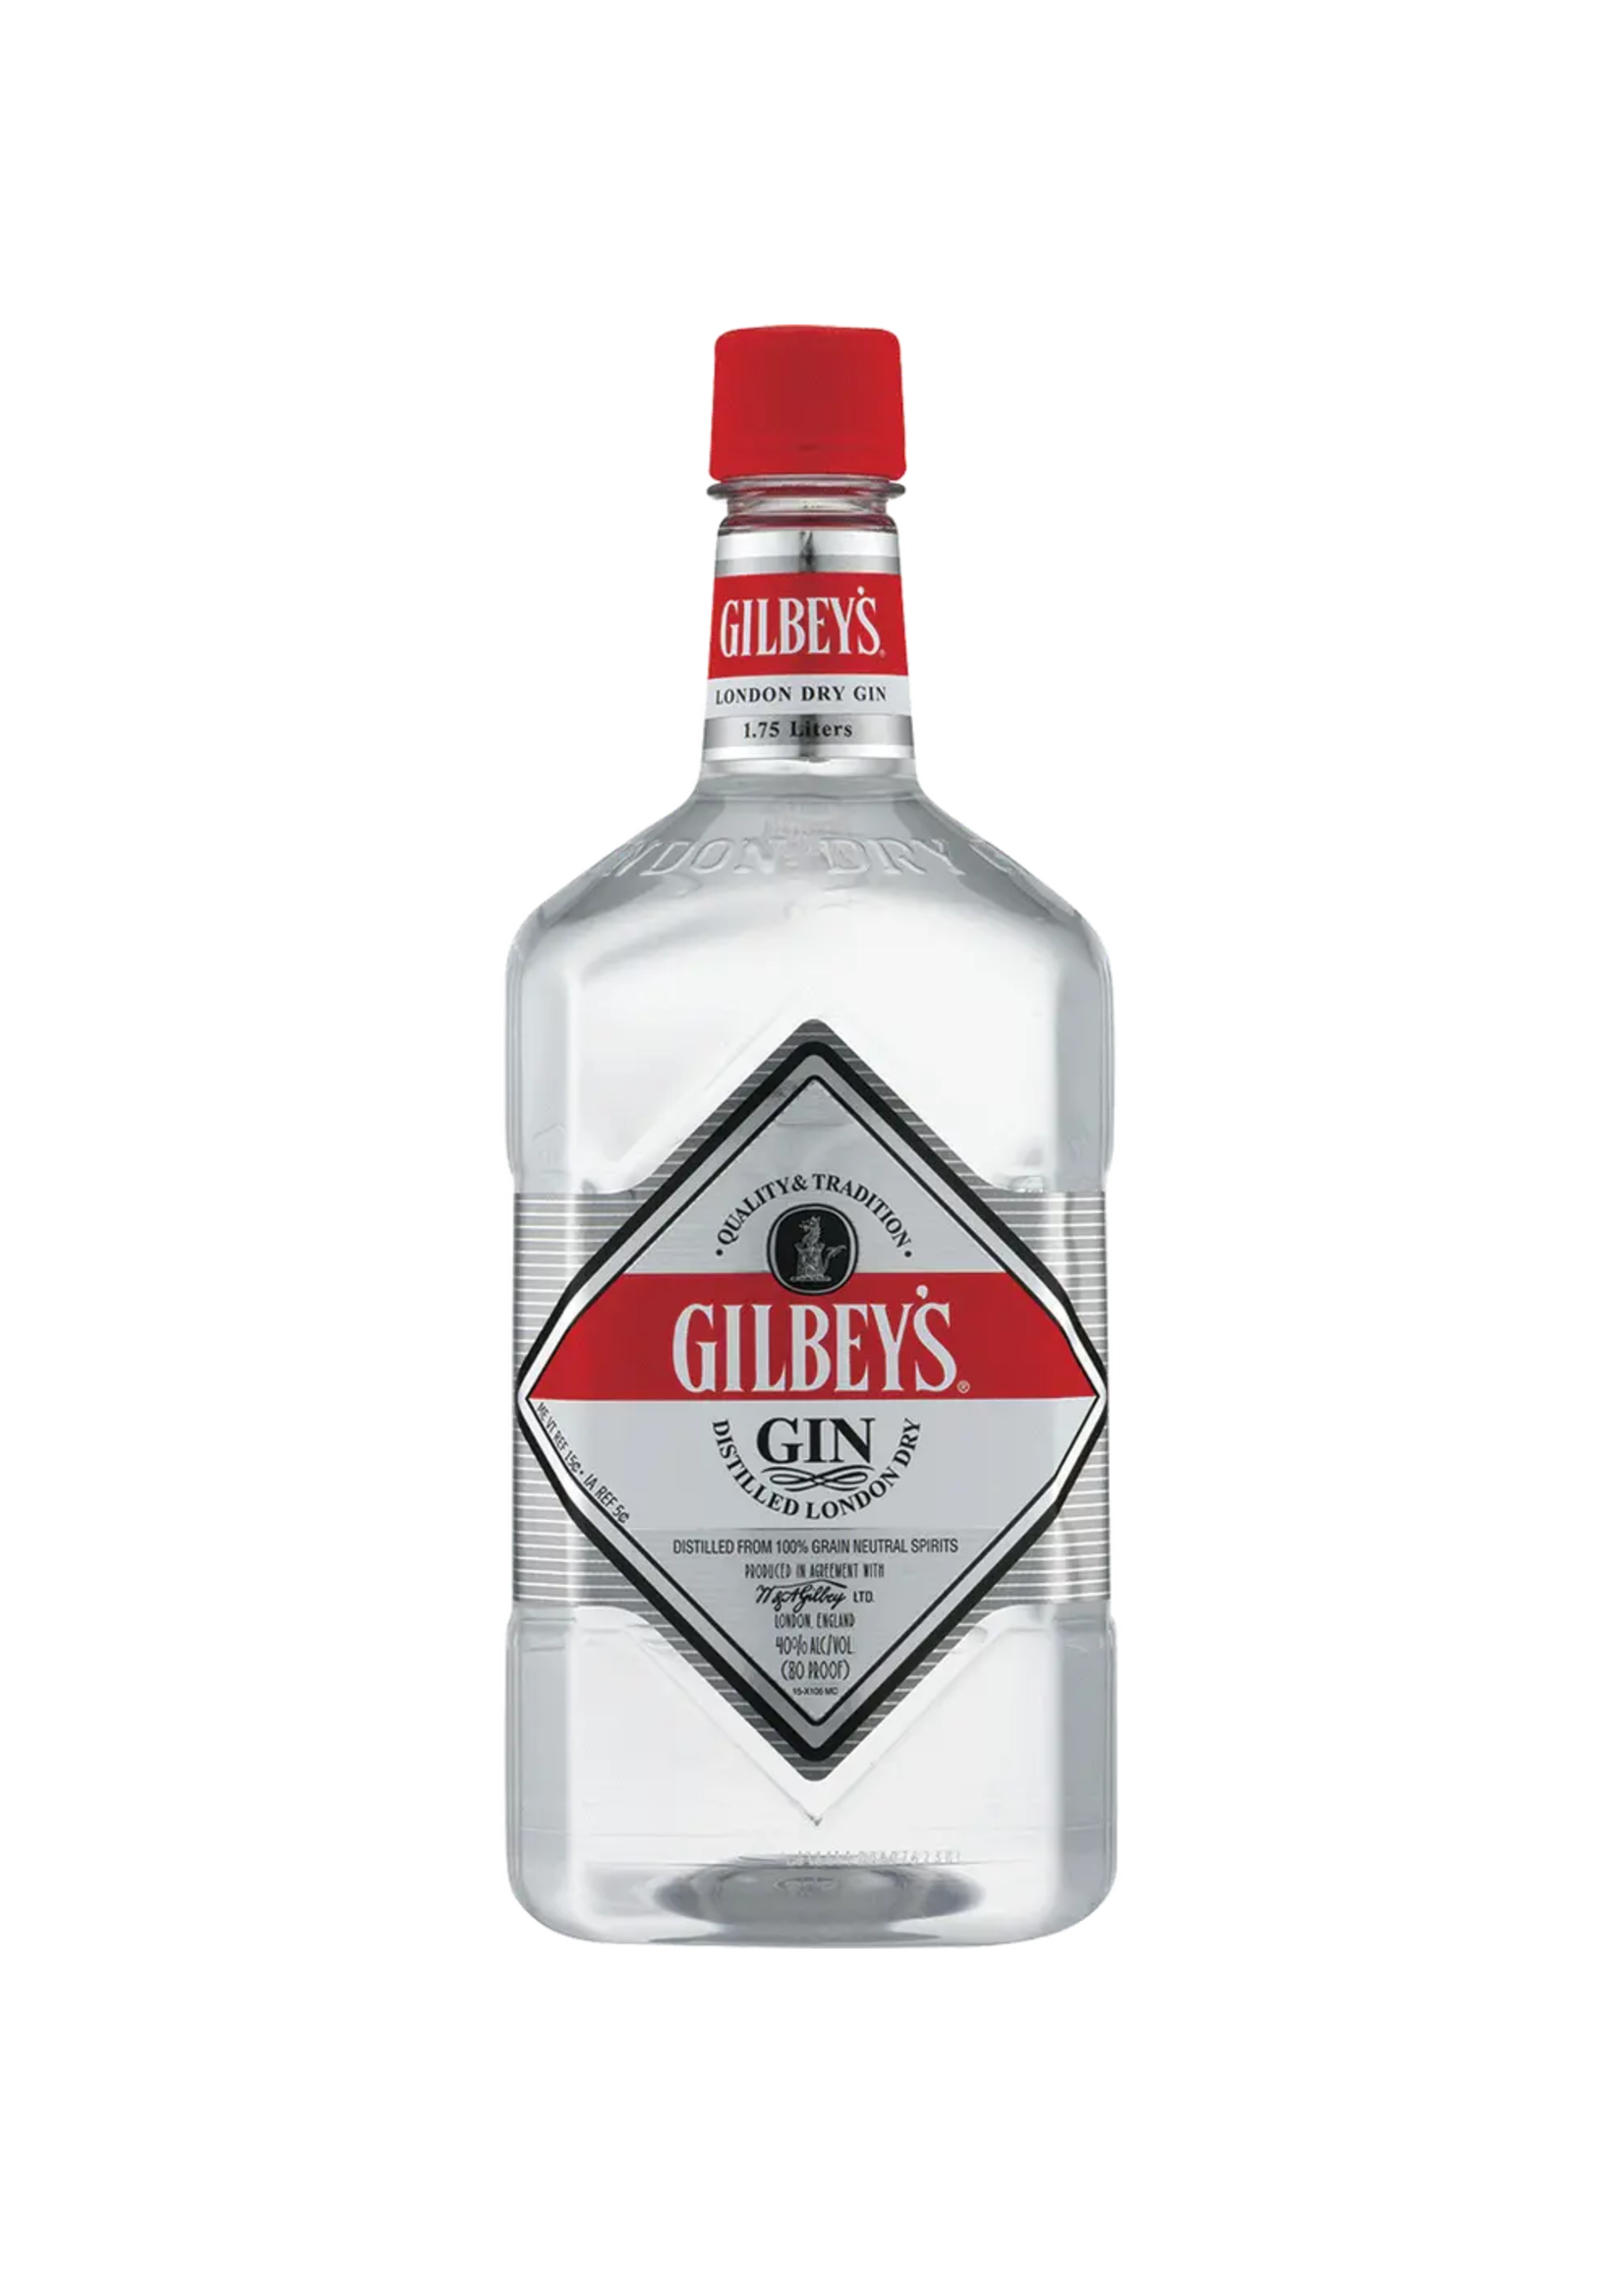 Gilbey's Gin 80Proof Pet 1.75 Ltr